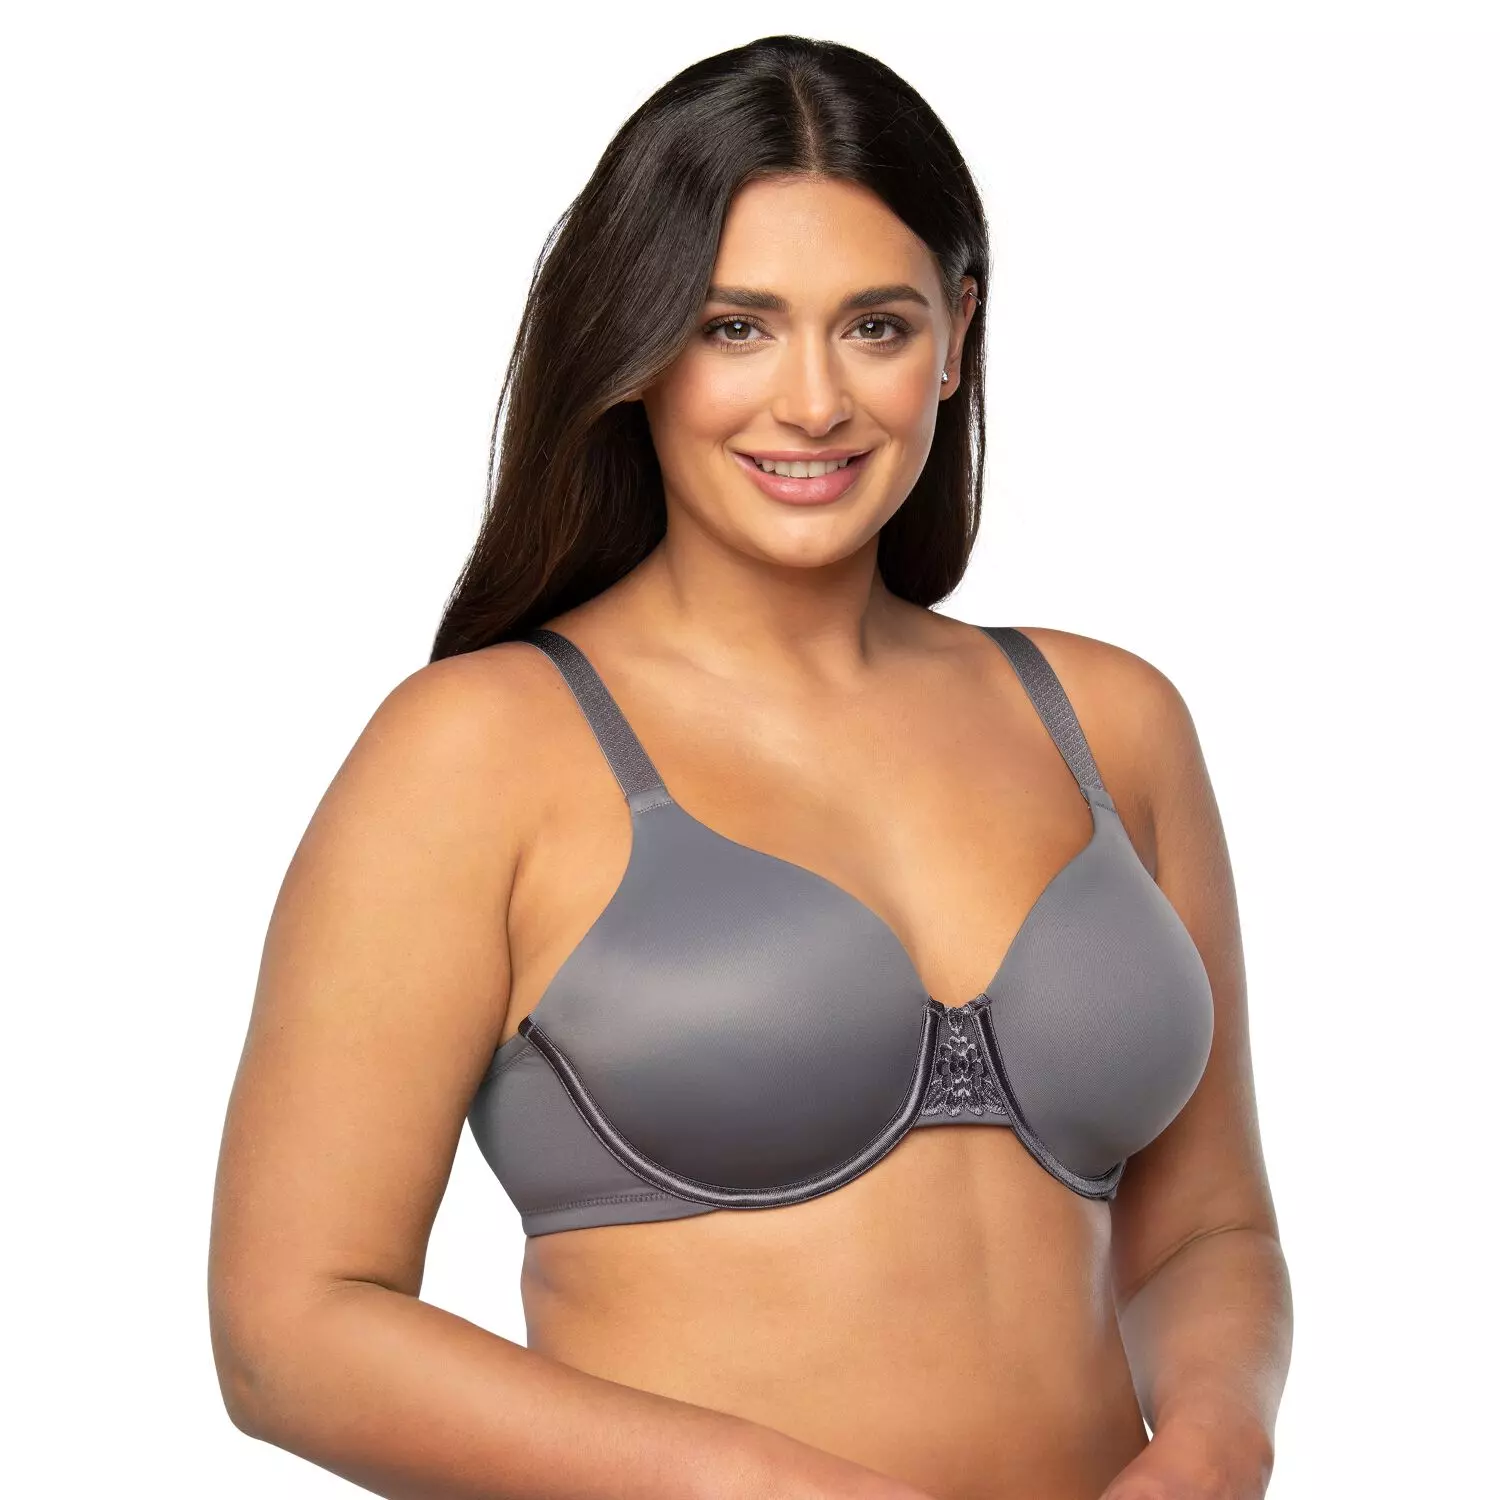 Are Bras Now Designed To Go Five Miles Into Your Armpit?, 60% OFF